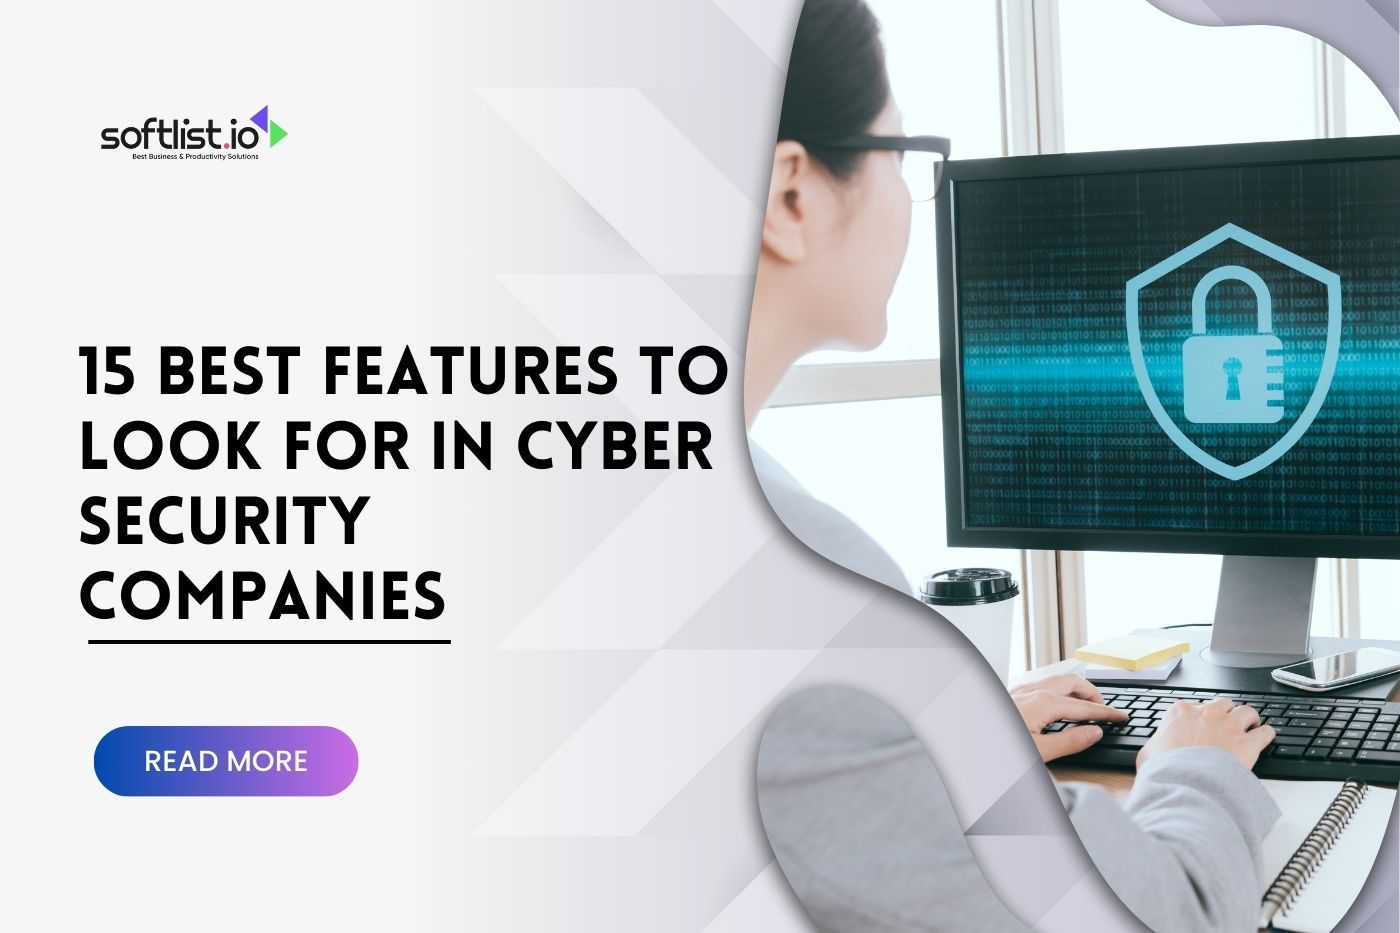 15 Features To Look for in Cyber Security Companies